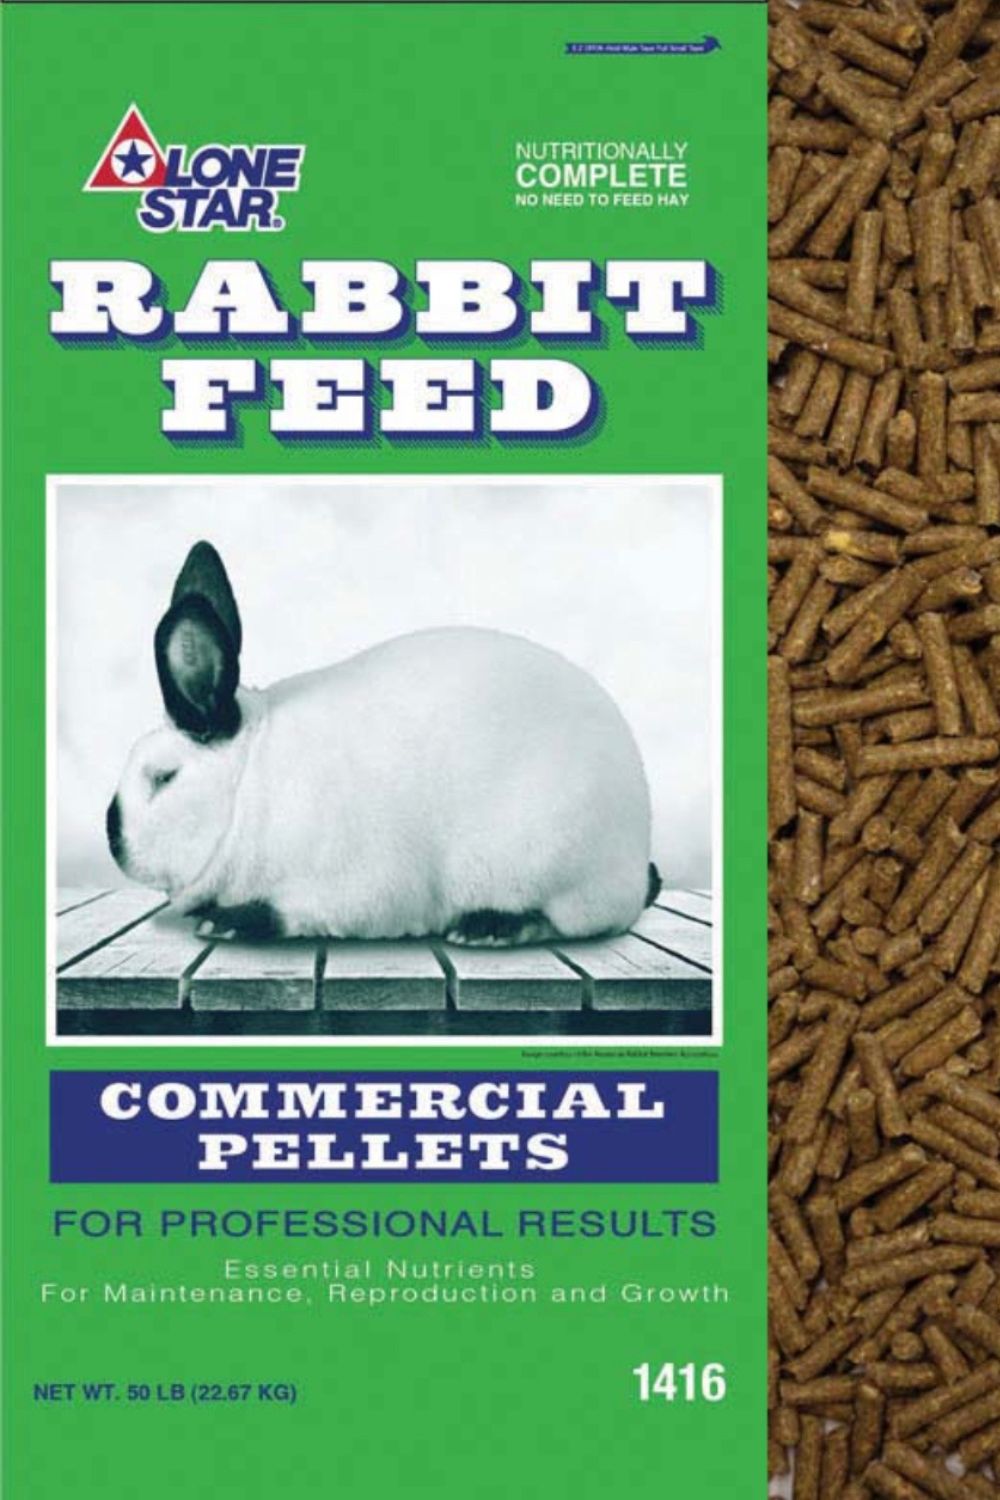 What to feed rabbits